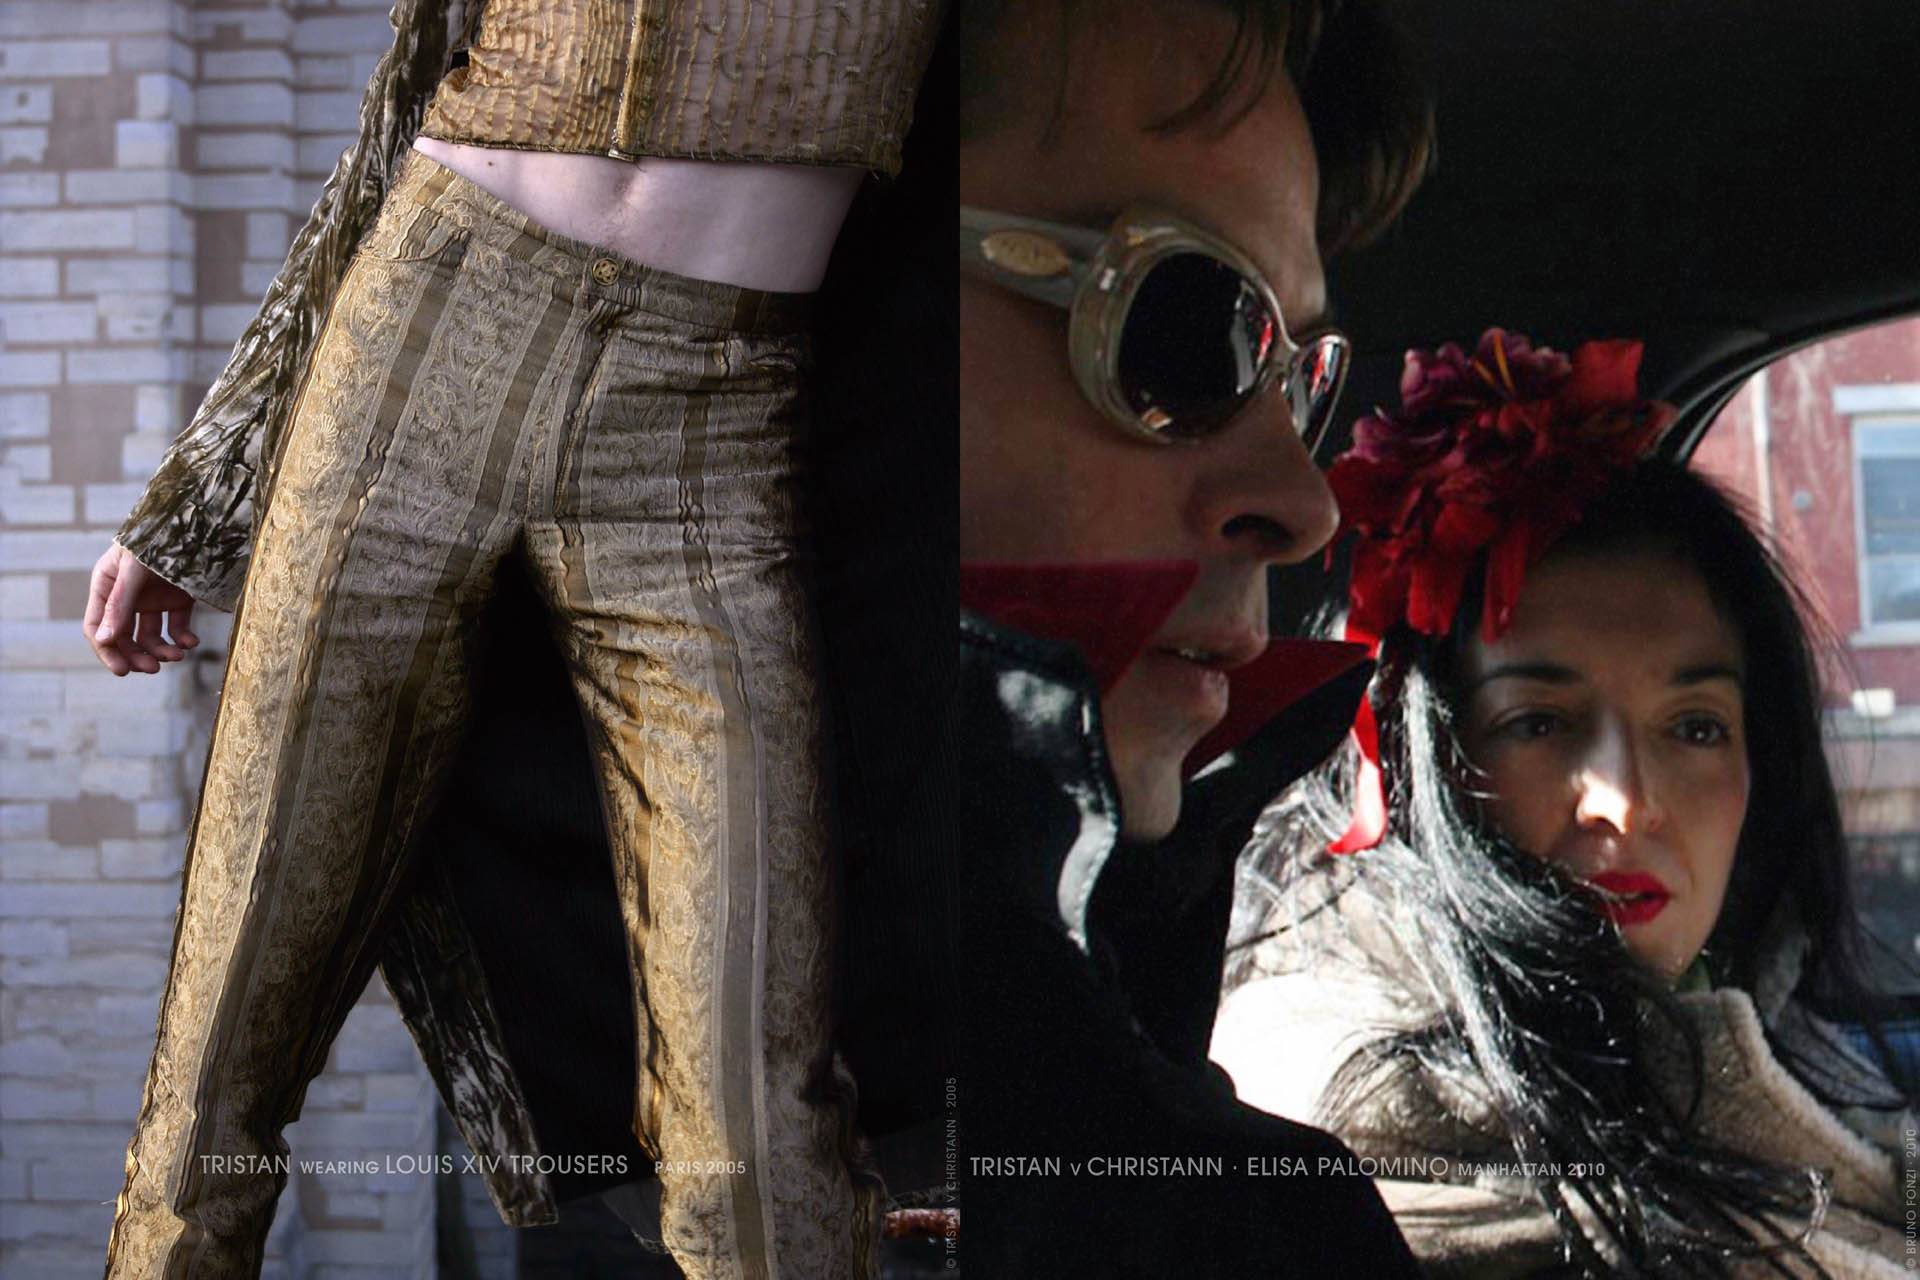 Tristan V Christann with LOUIS XIV TROUSERS in Paris 2005 and with ELISA PALOMINO in Manhattan 2010